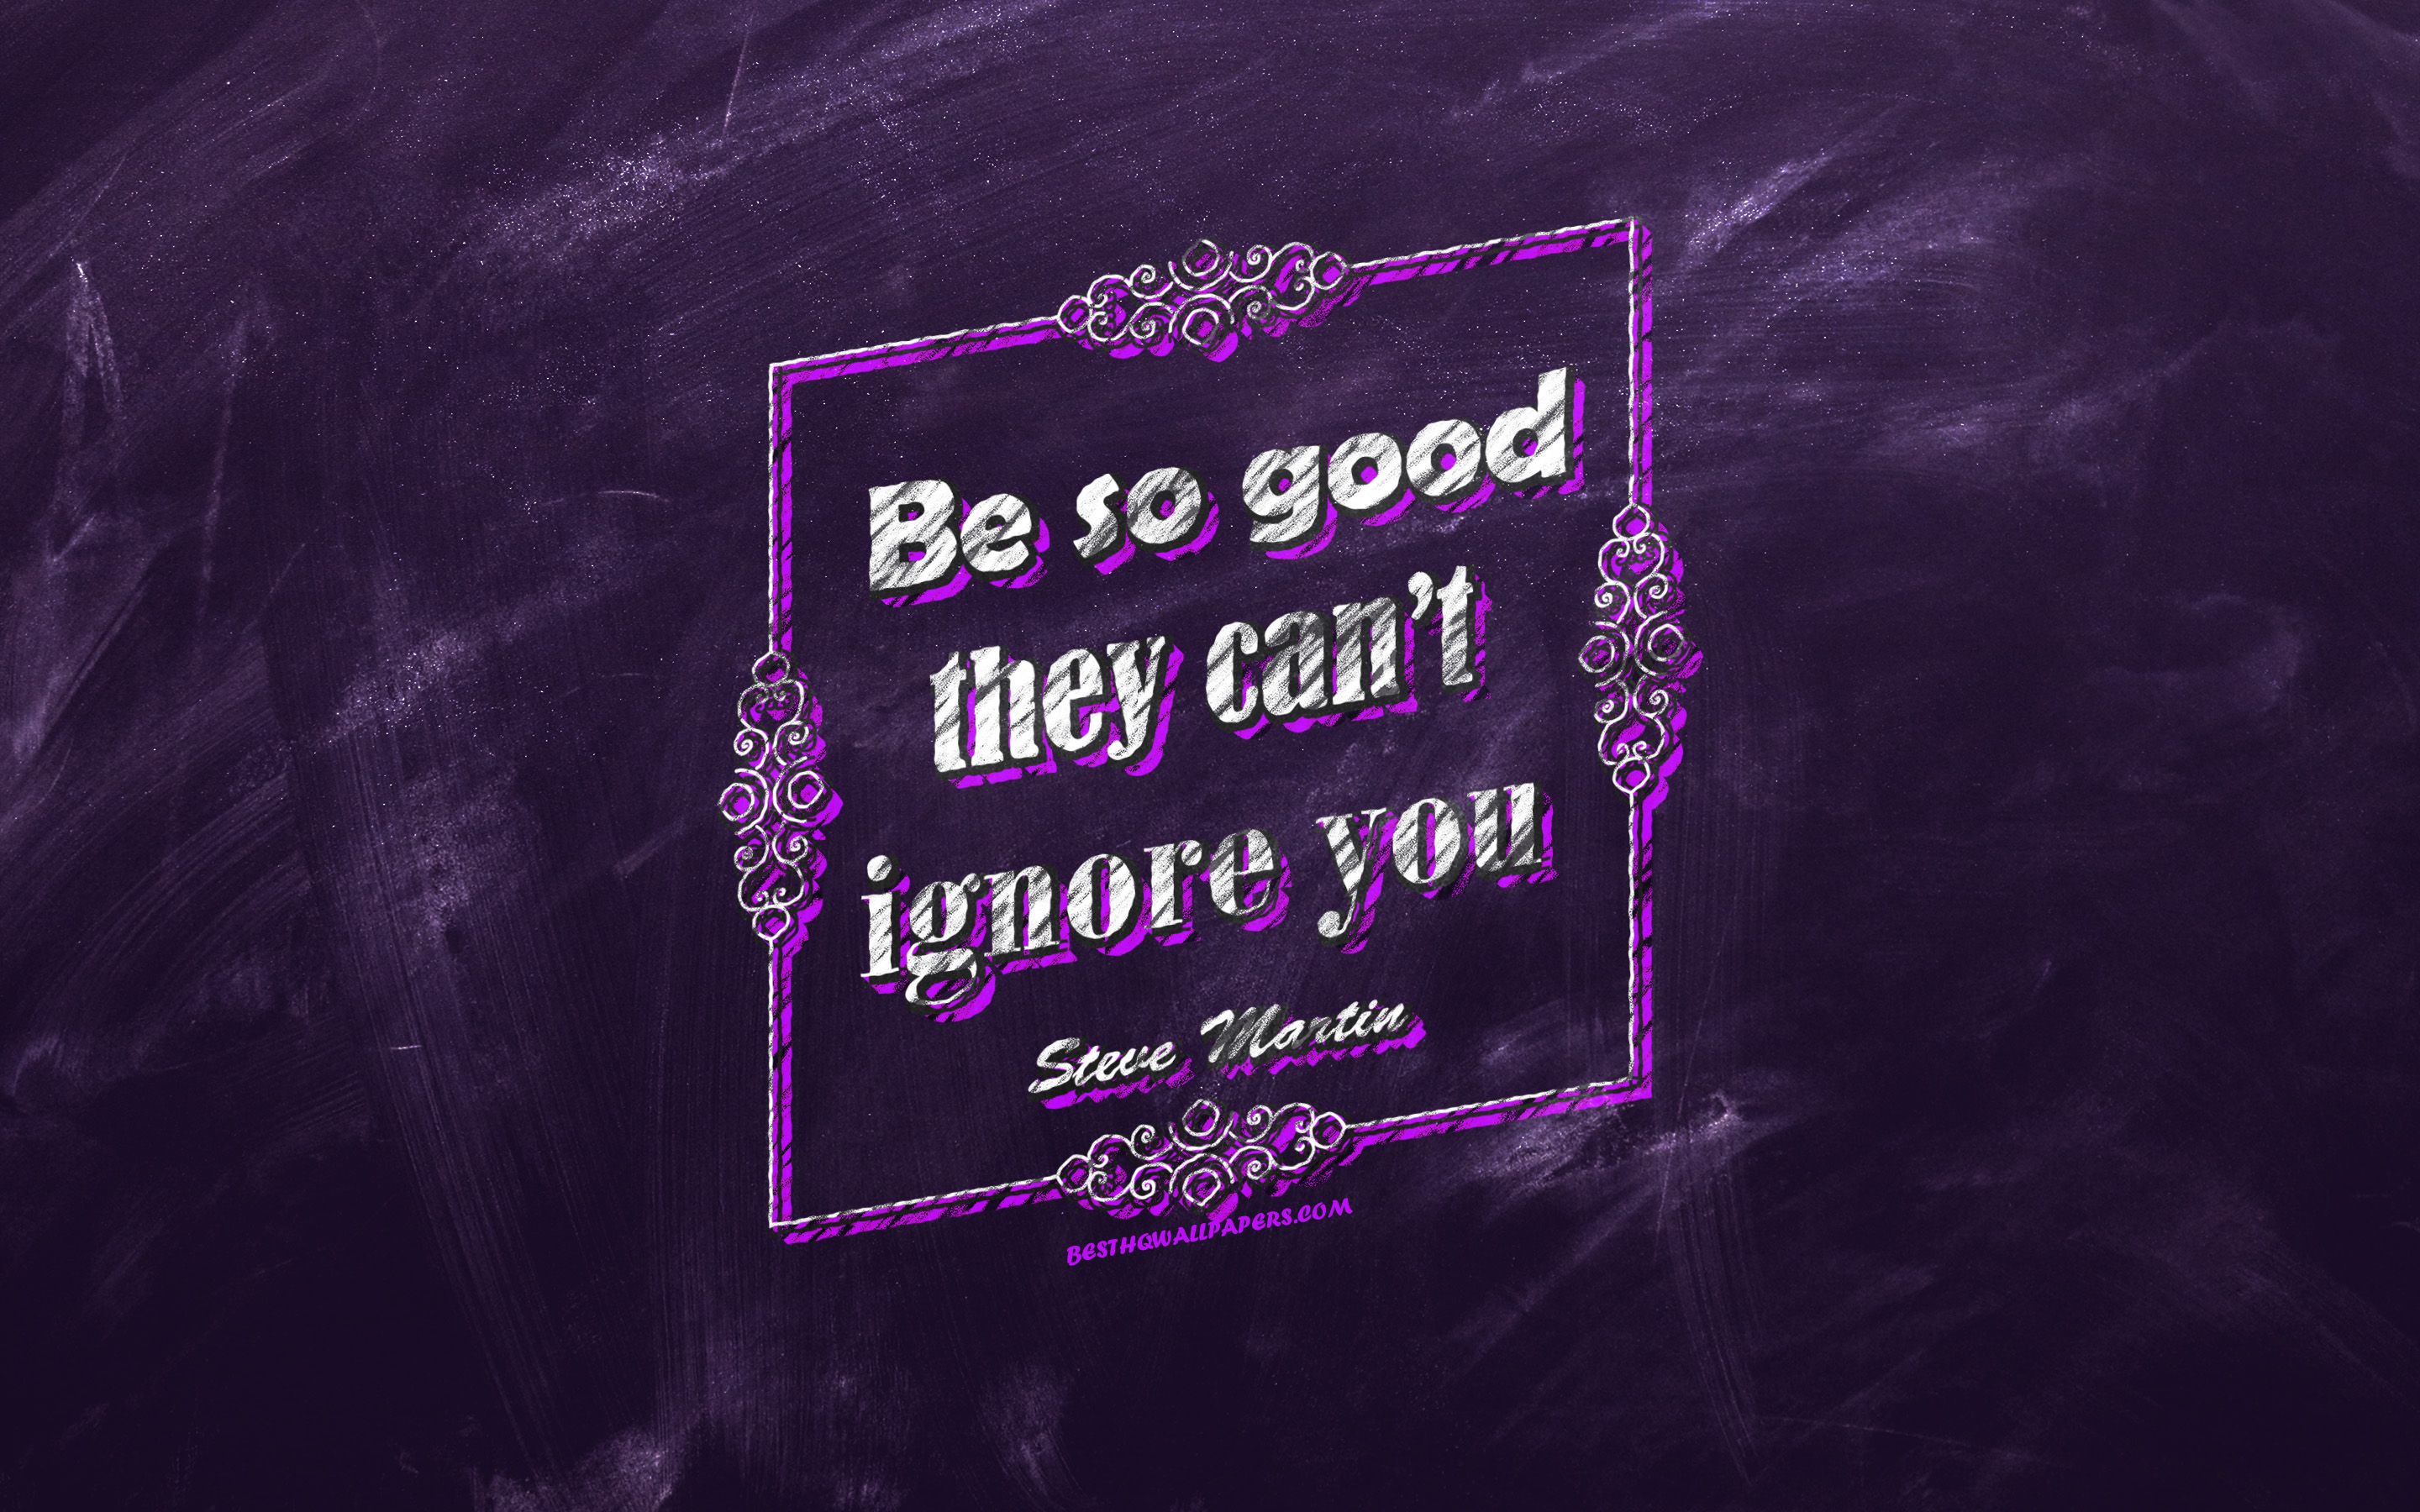 Download wallpaper Be so good they cant ignore you, chalkboard